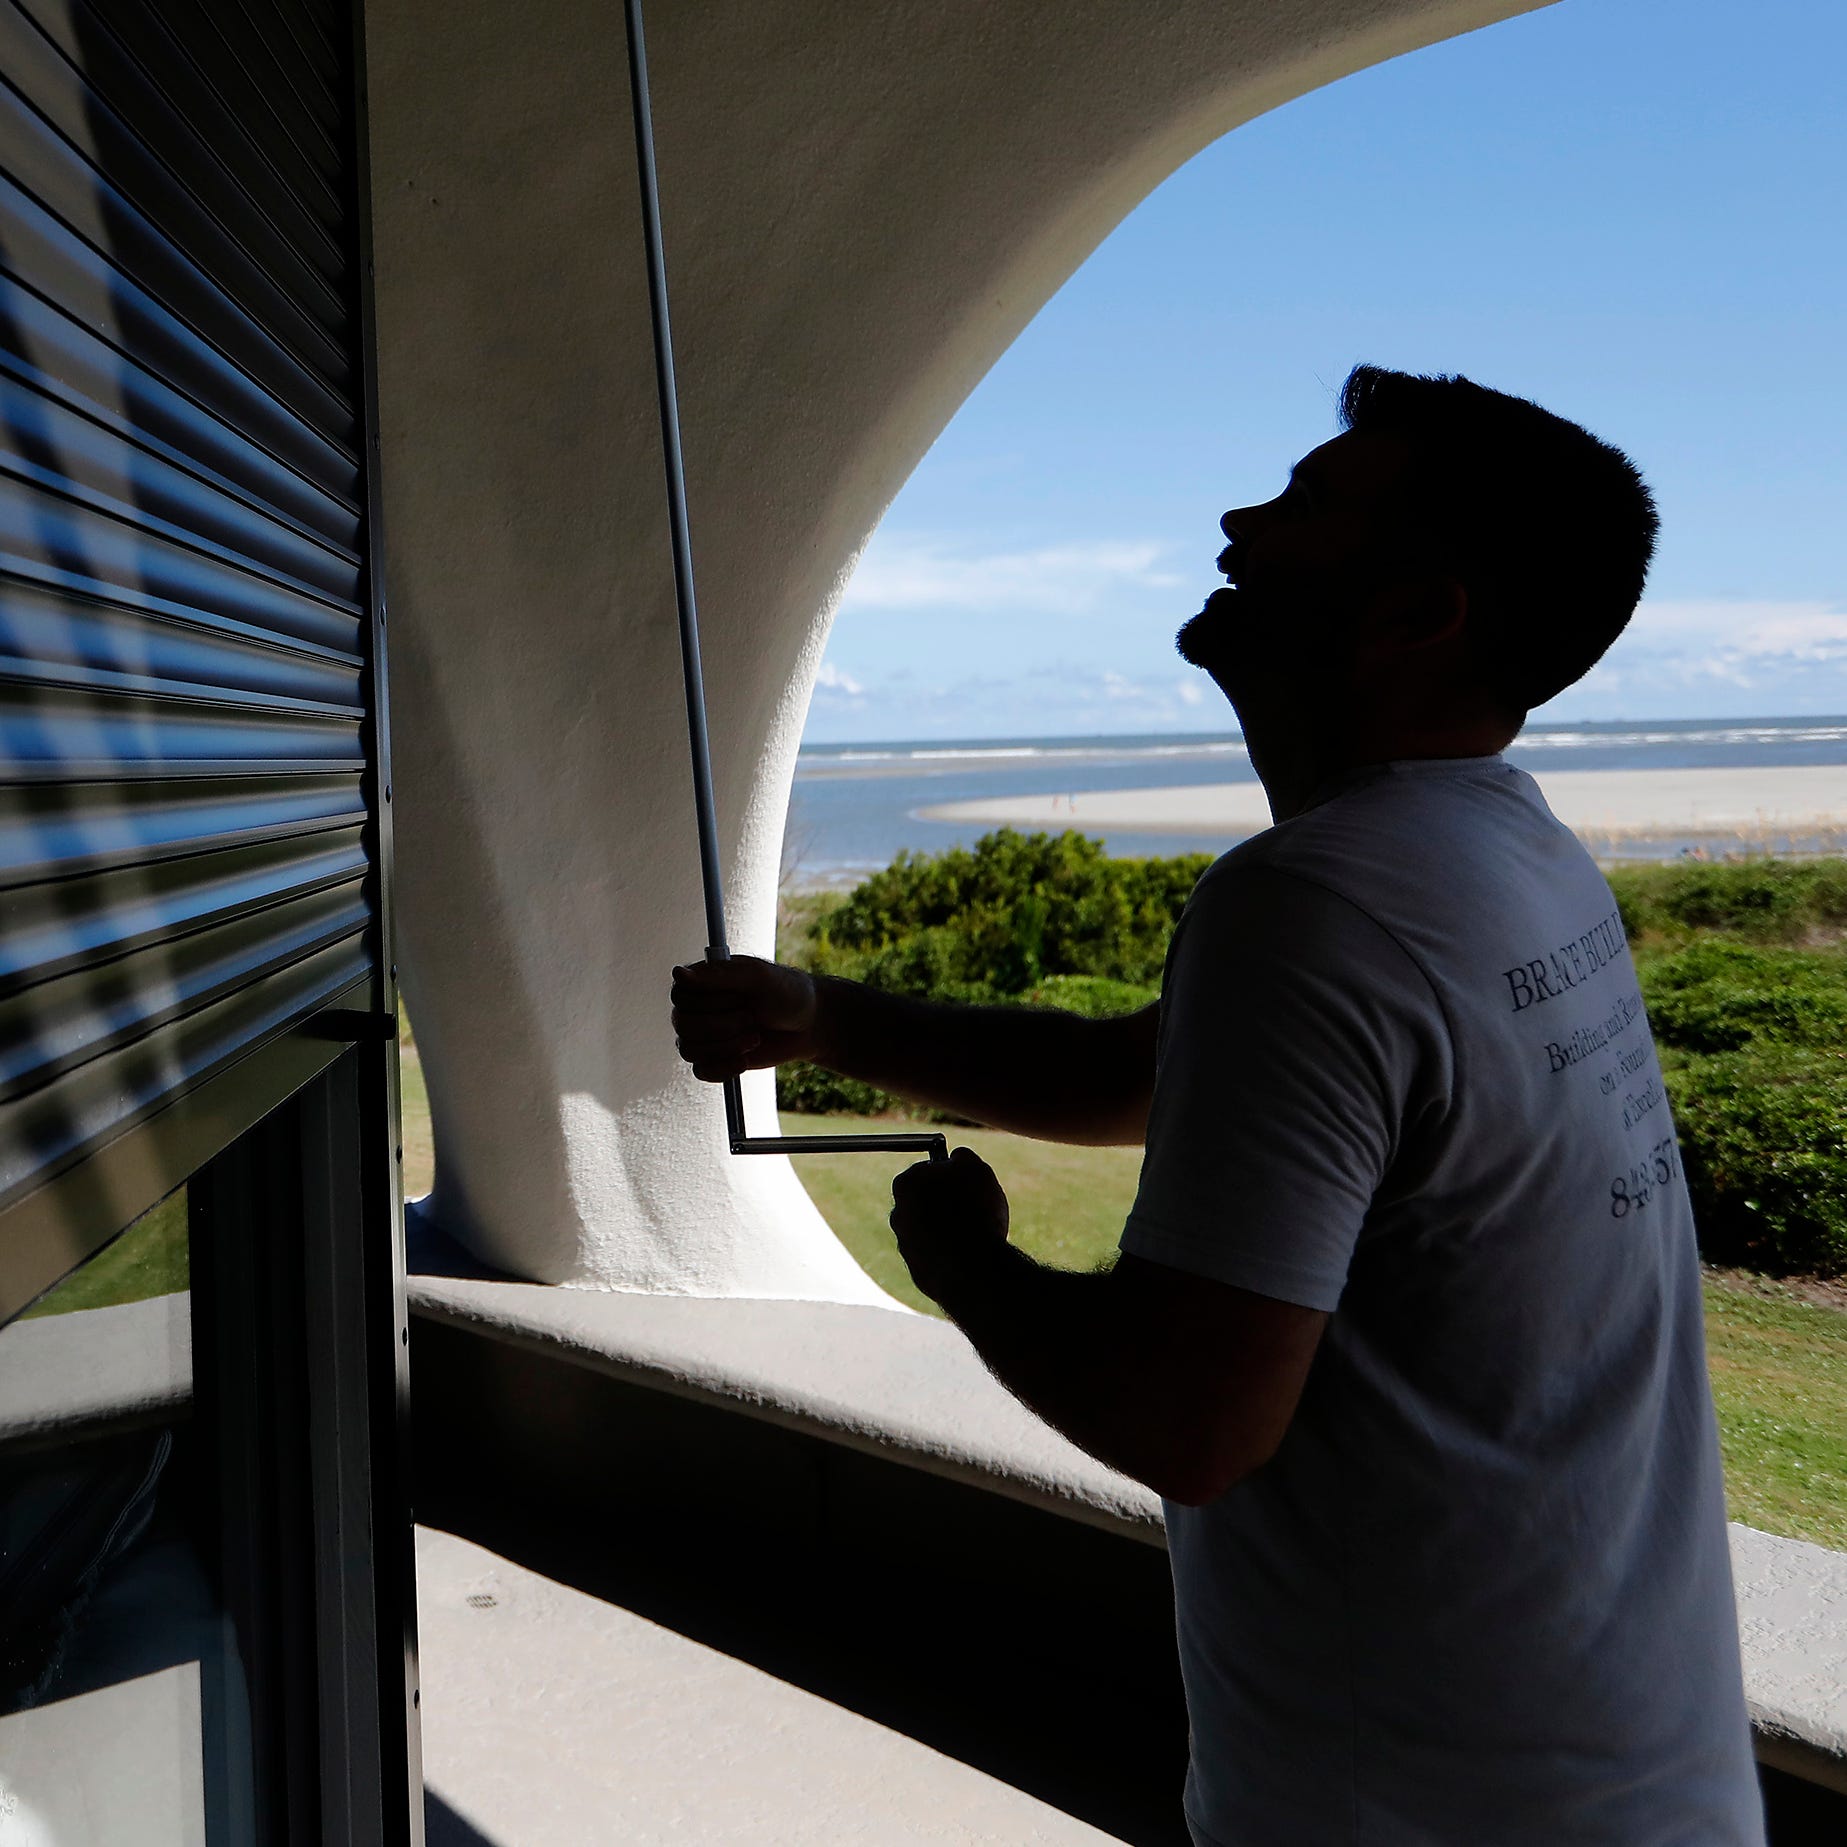 Chris Brace, from Charleston, S.C. lowers hurricane shutters on a client's house in preparation for Hurricane Florence at Sullivan's Island, S.C., Monday, Sept. 10, 2018. Brace said that after S.C. Gov. Henry McMaster ordered an evacuation the proper